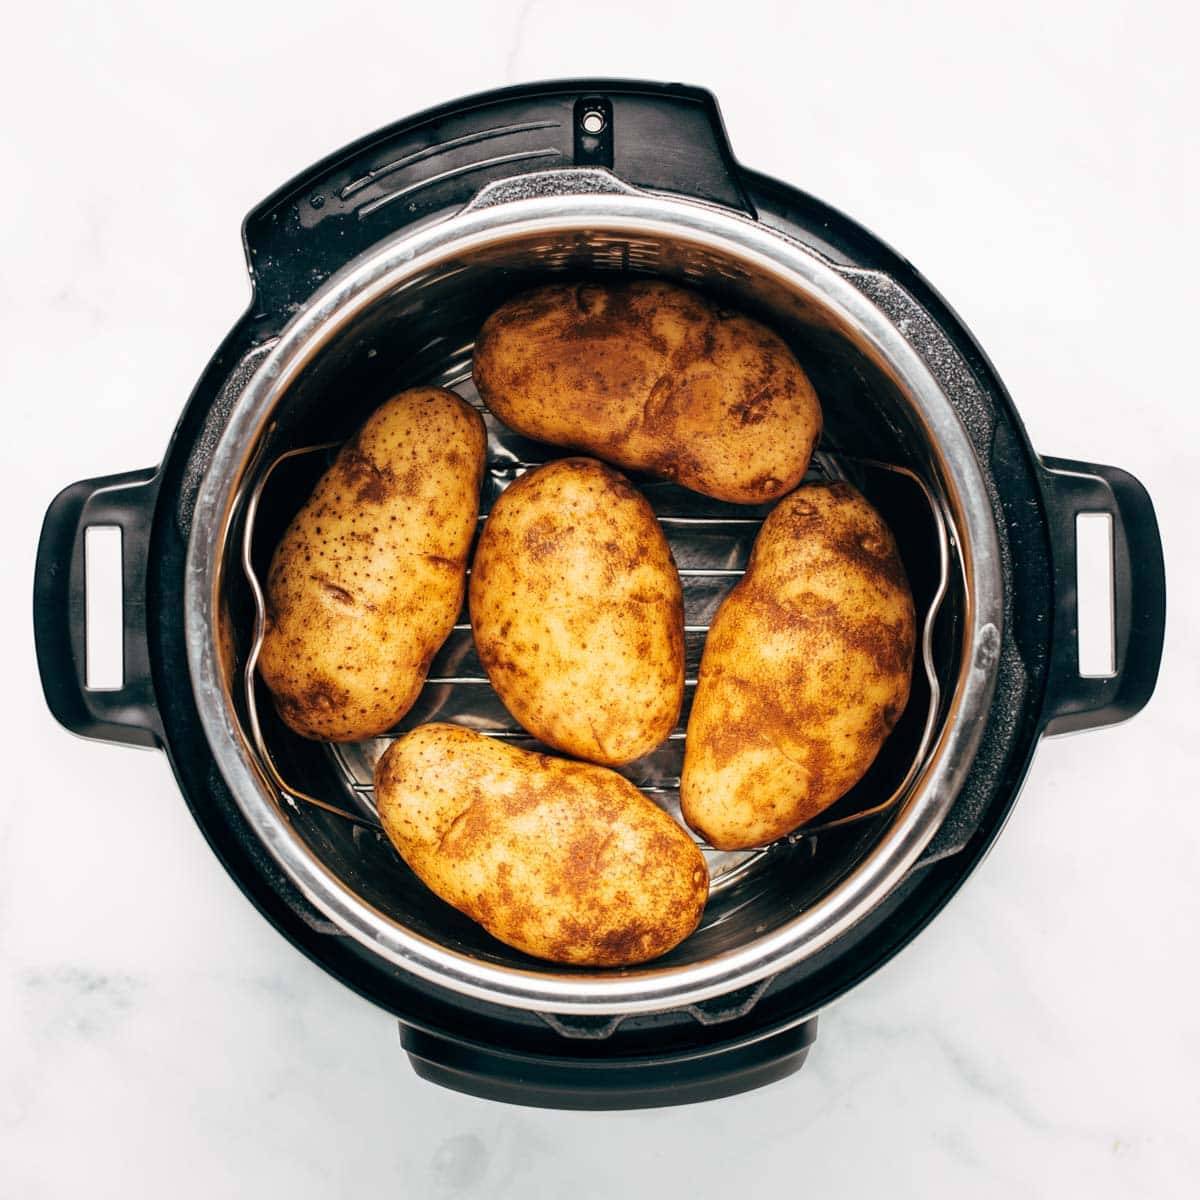 Raw potatoes in the Instant Pot.